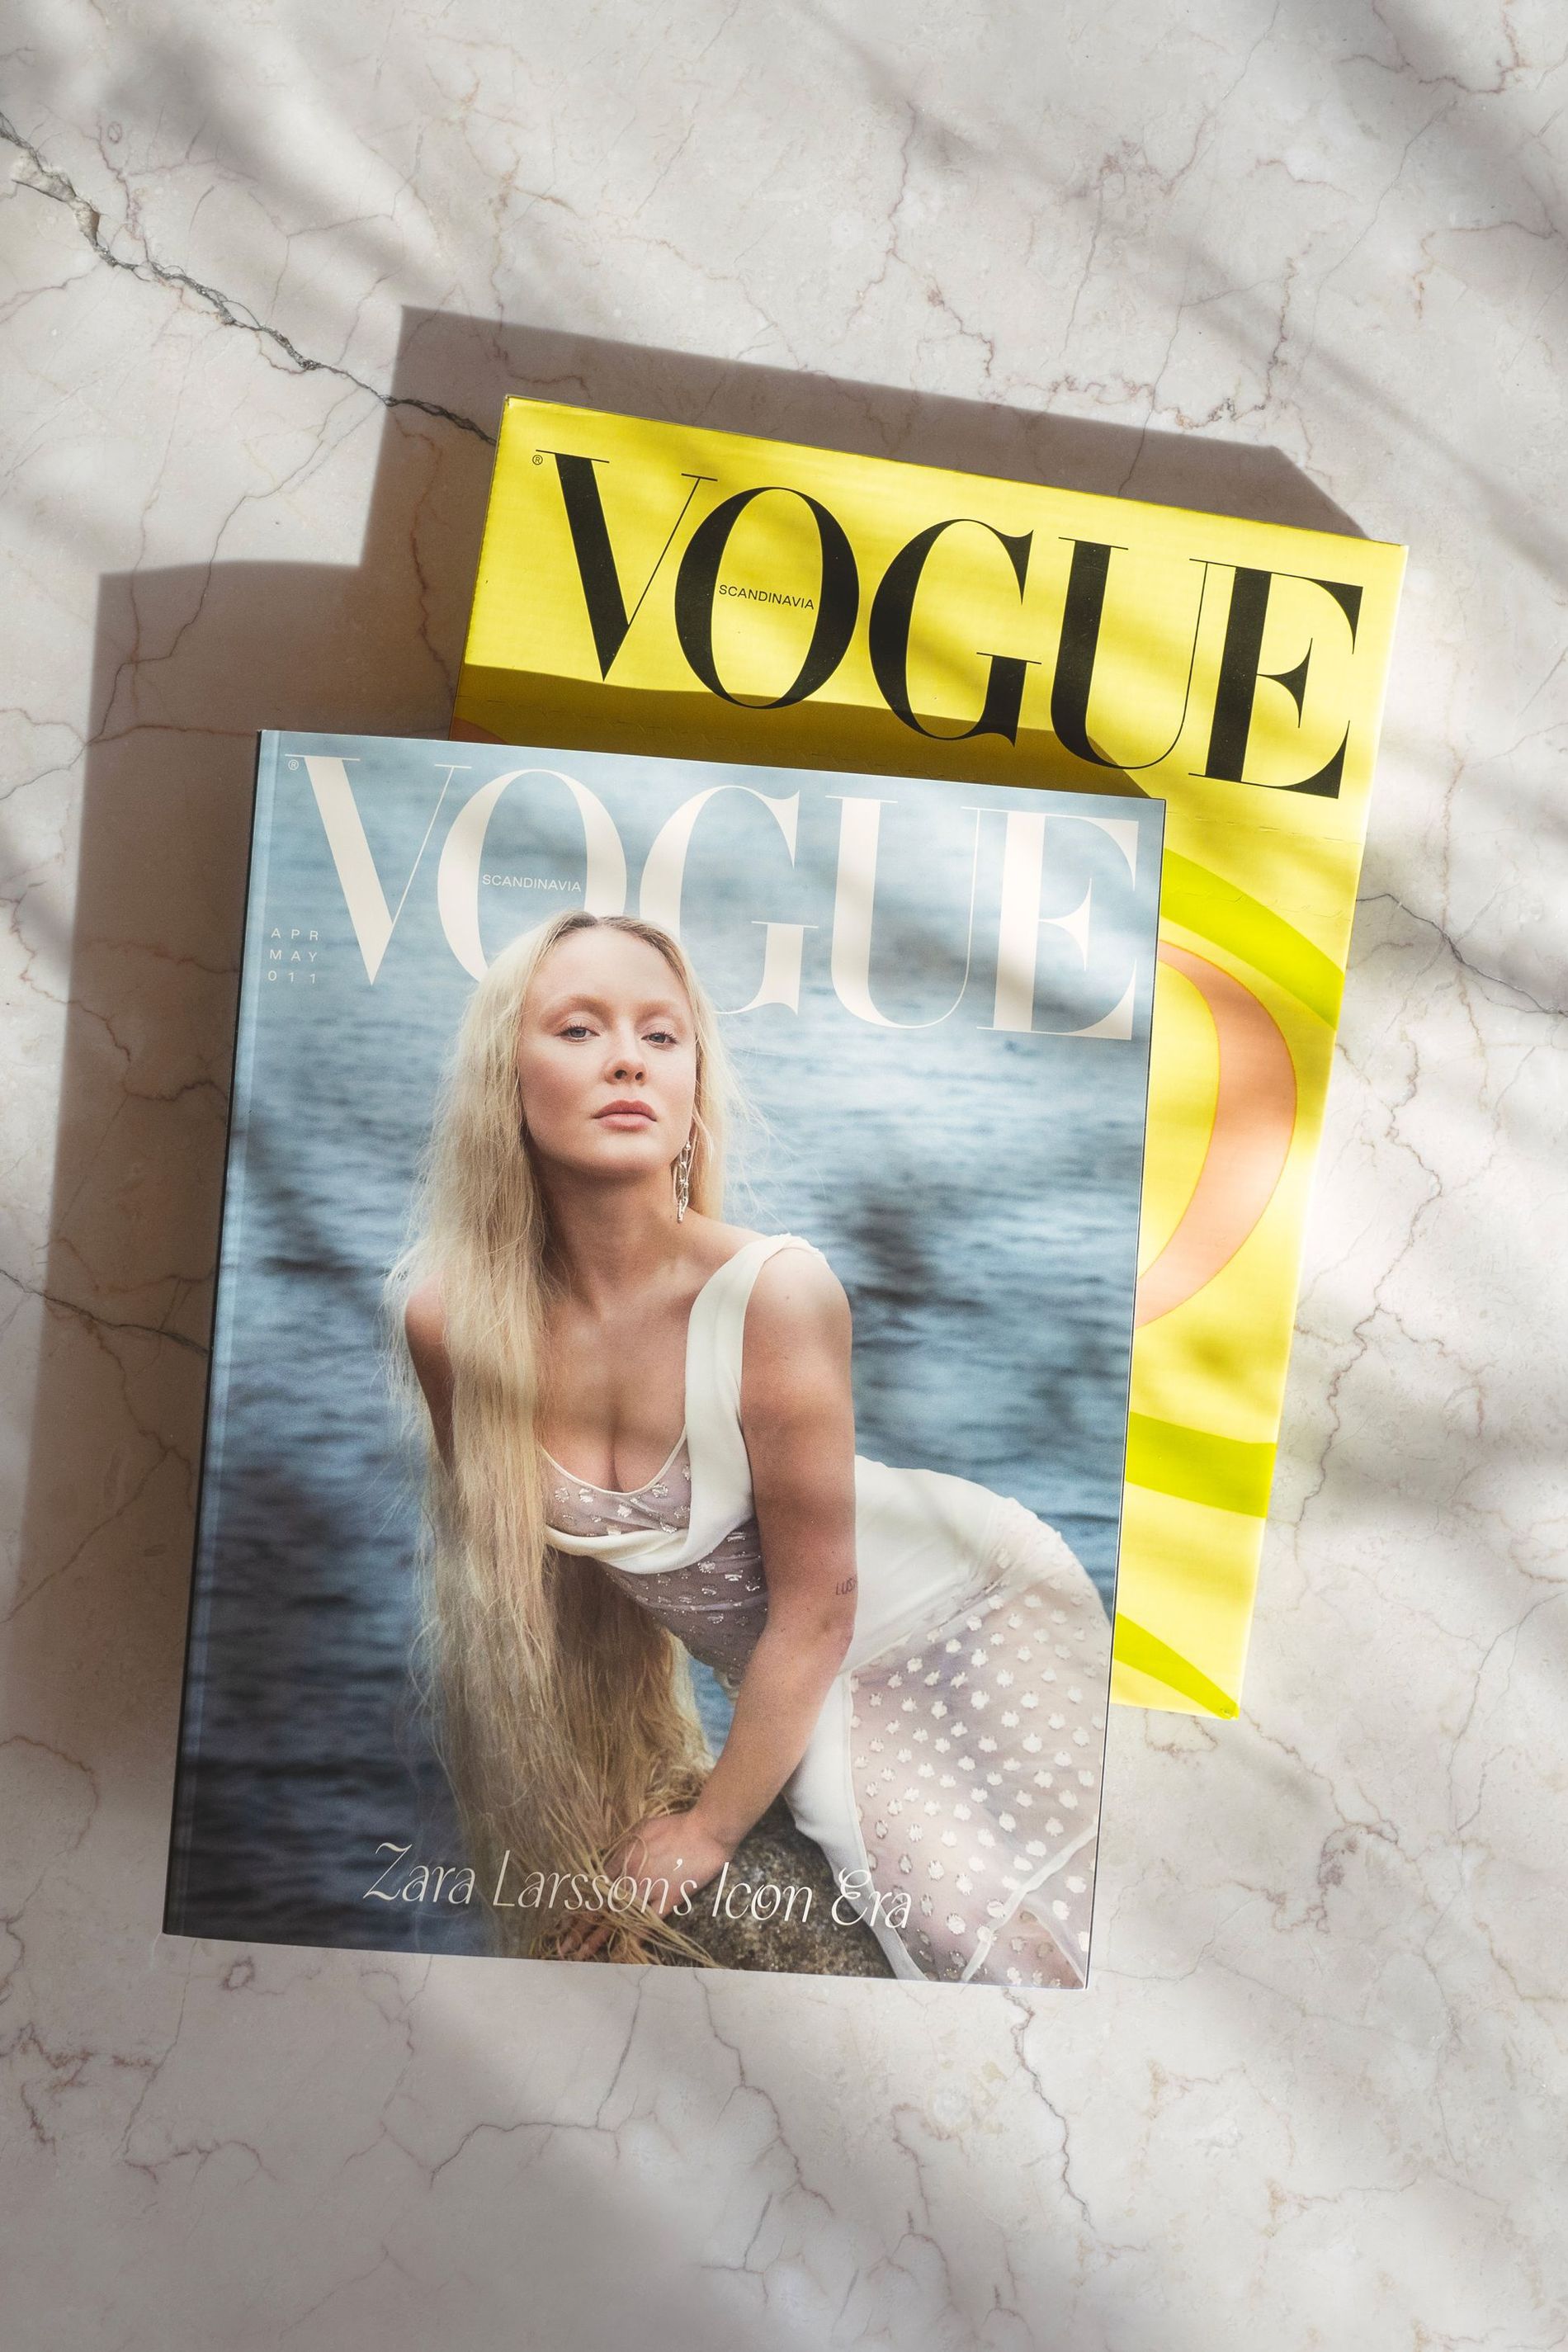 Vogue Scandinavia Magazine — The April/May Issue featuring Zara 